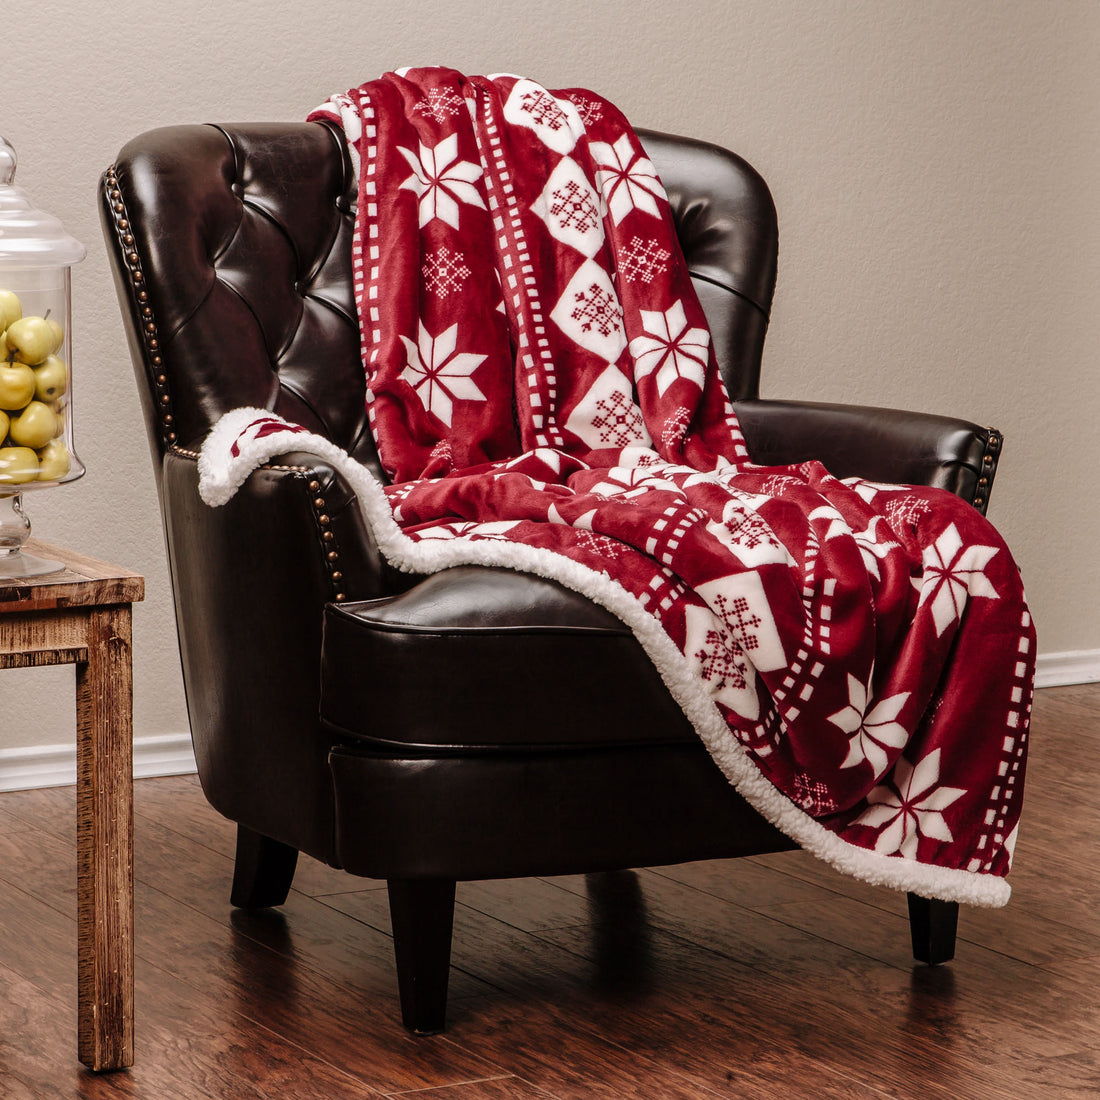 Holiday Sherpa Red Throw Blanket